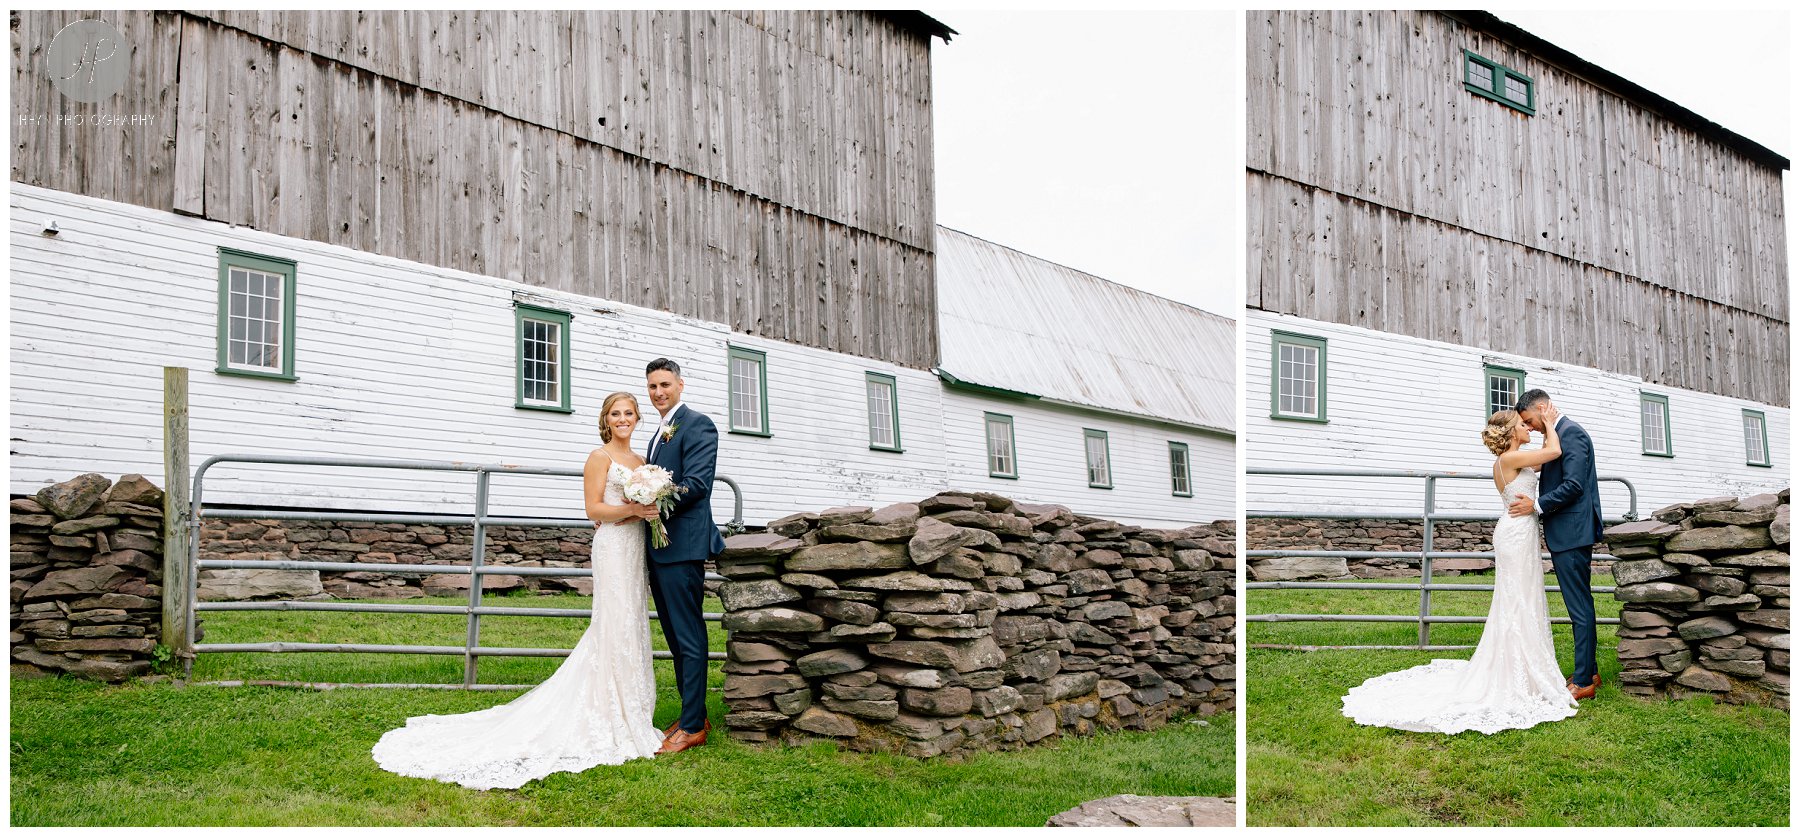 bride and groom by barn at stone tavern farm wedding in the catskills new york